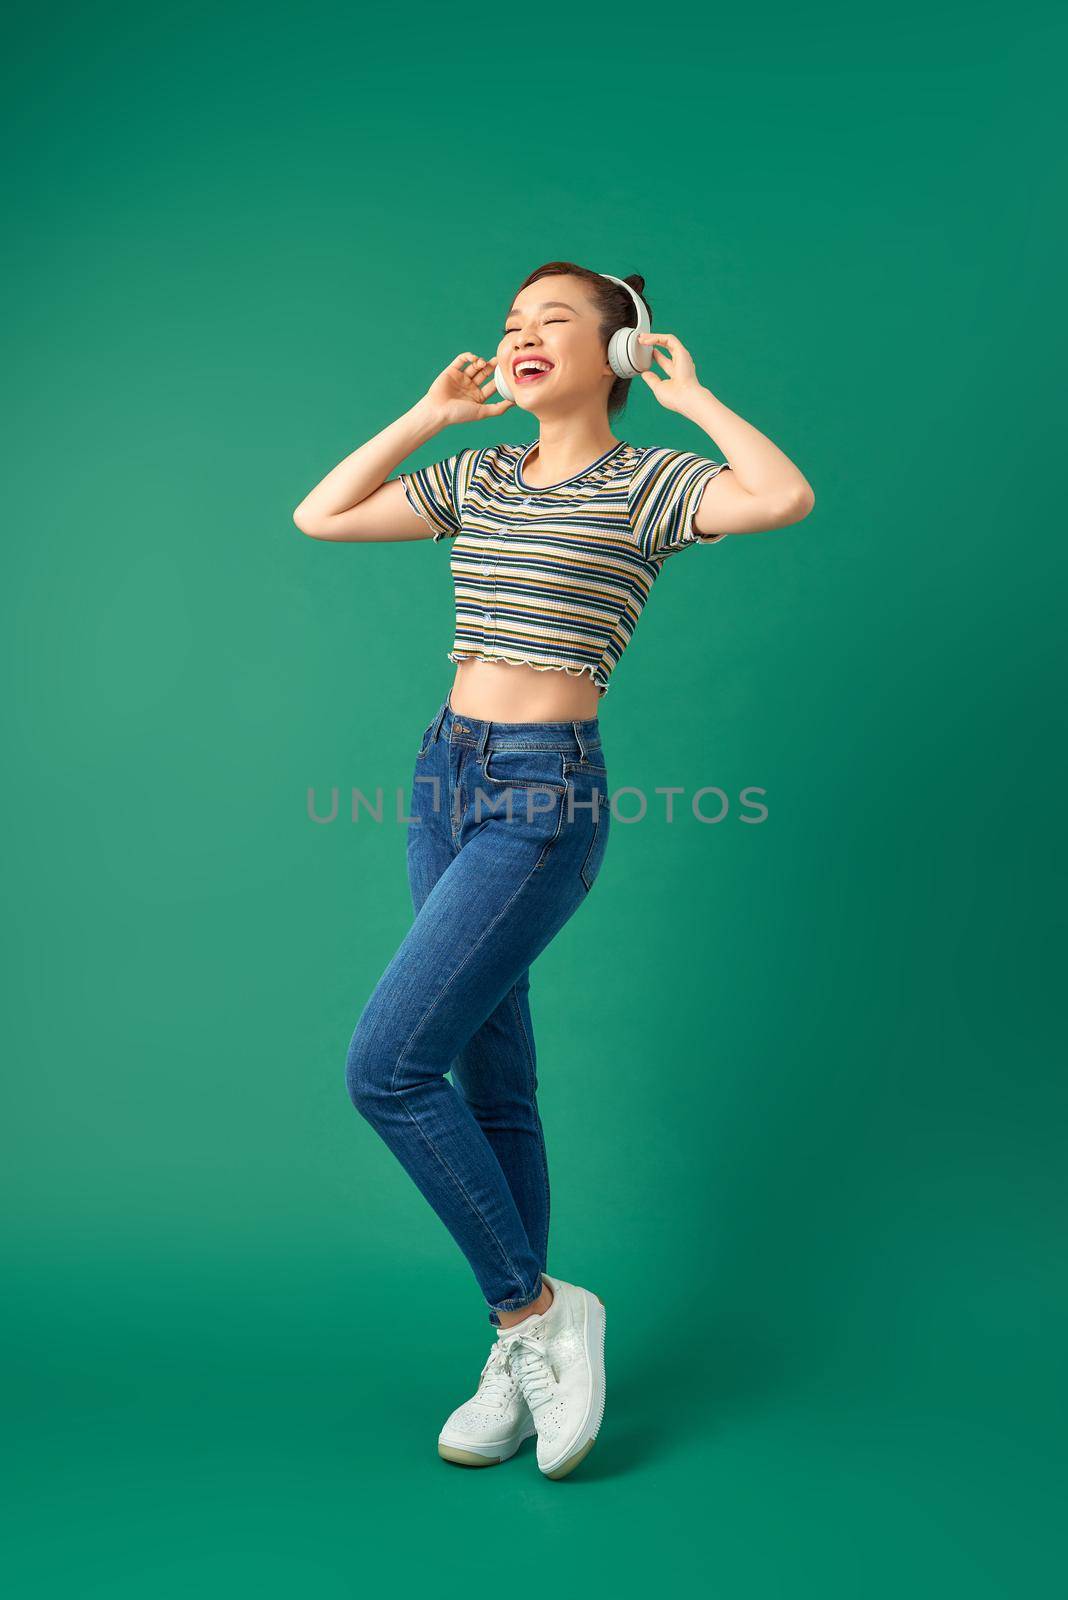 Energy girl with headphones listening to music with closed eyes on green background in studio. Wearing T-shirt, jeans.